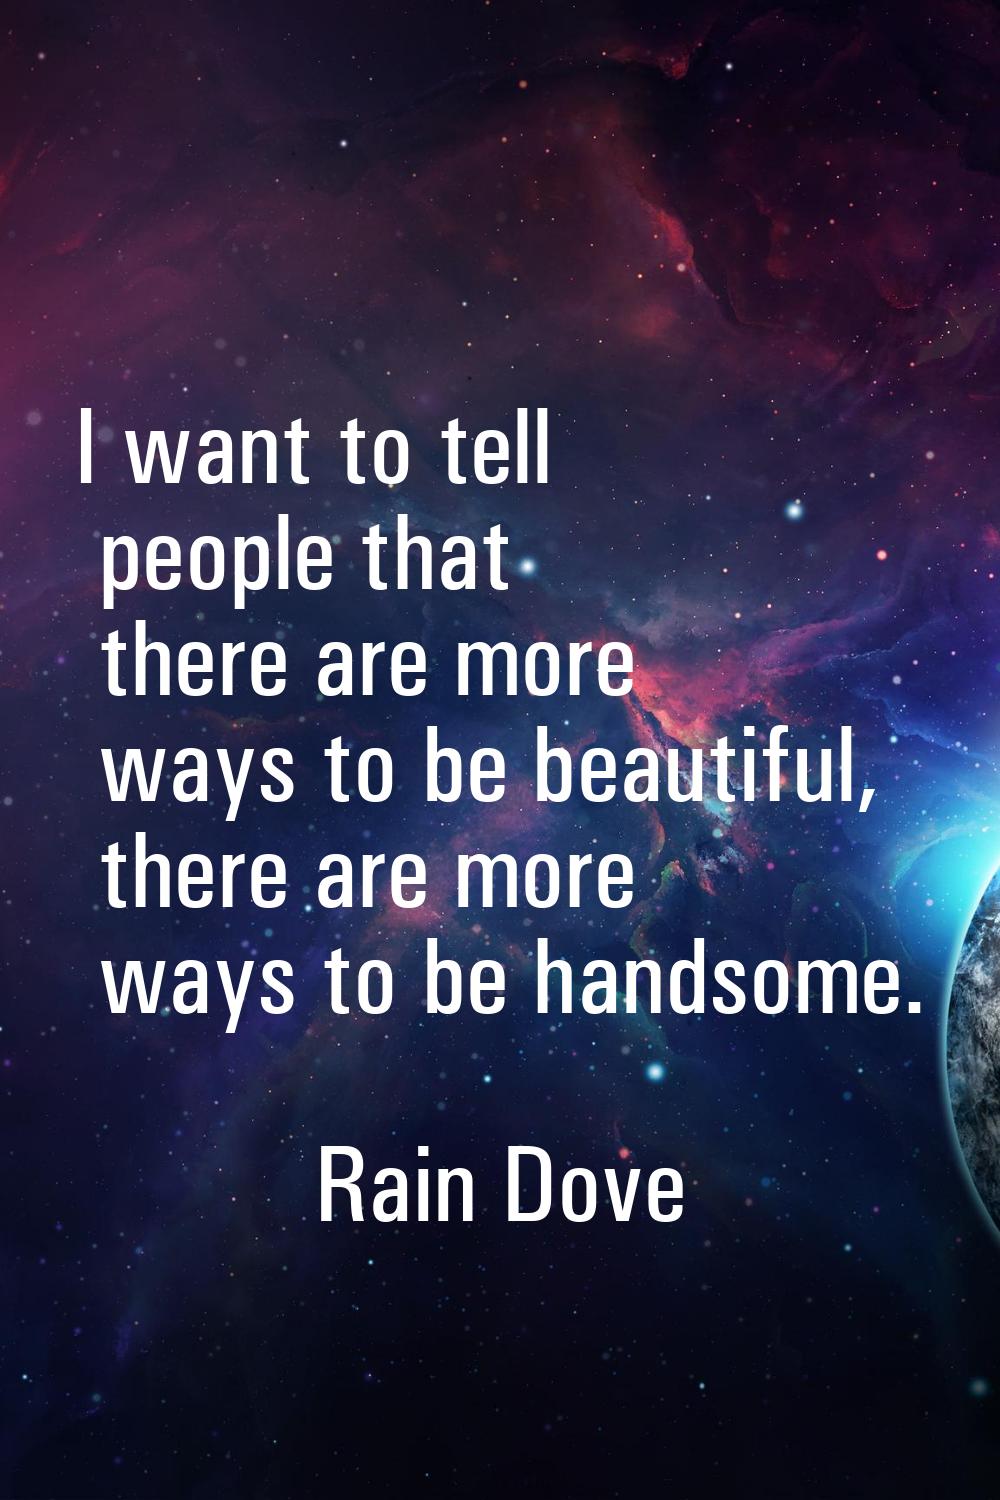 I want to tell people that there are more ways to be beautiful, there are more ways to be handsome.